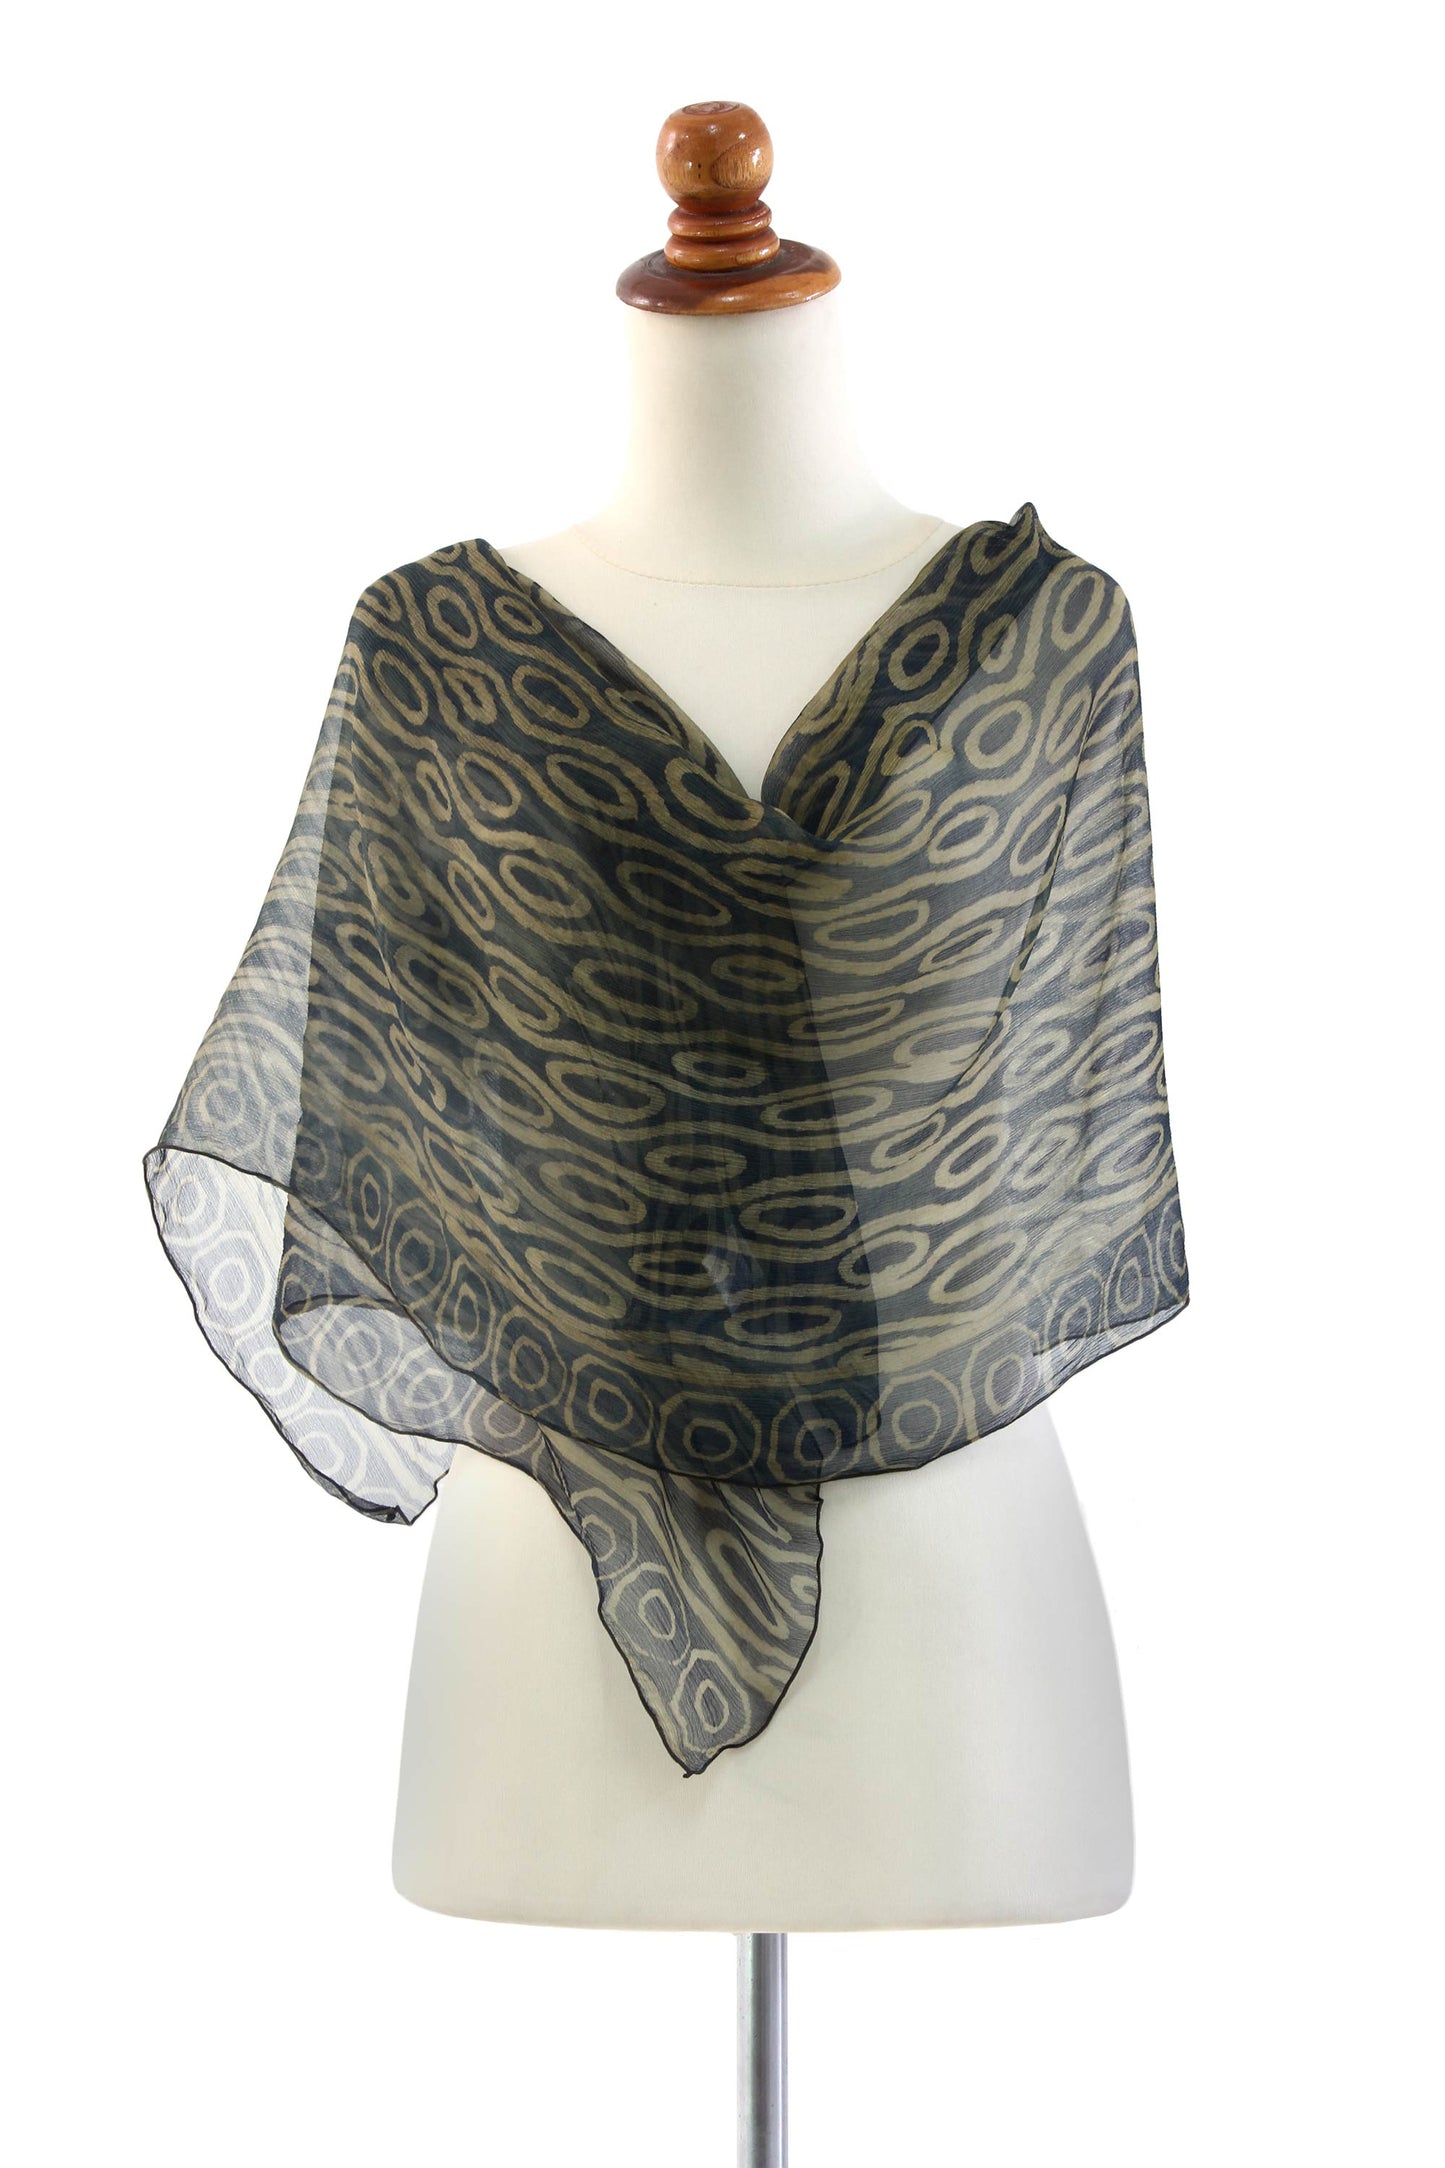 Olive Mist Geometric Patterned Silk Scarf from Indonesia